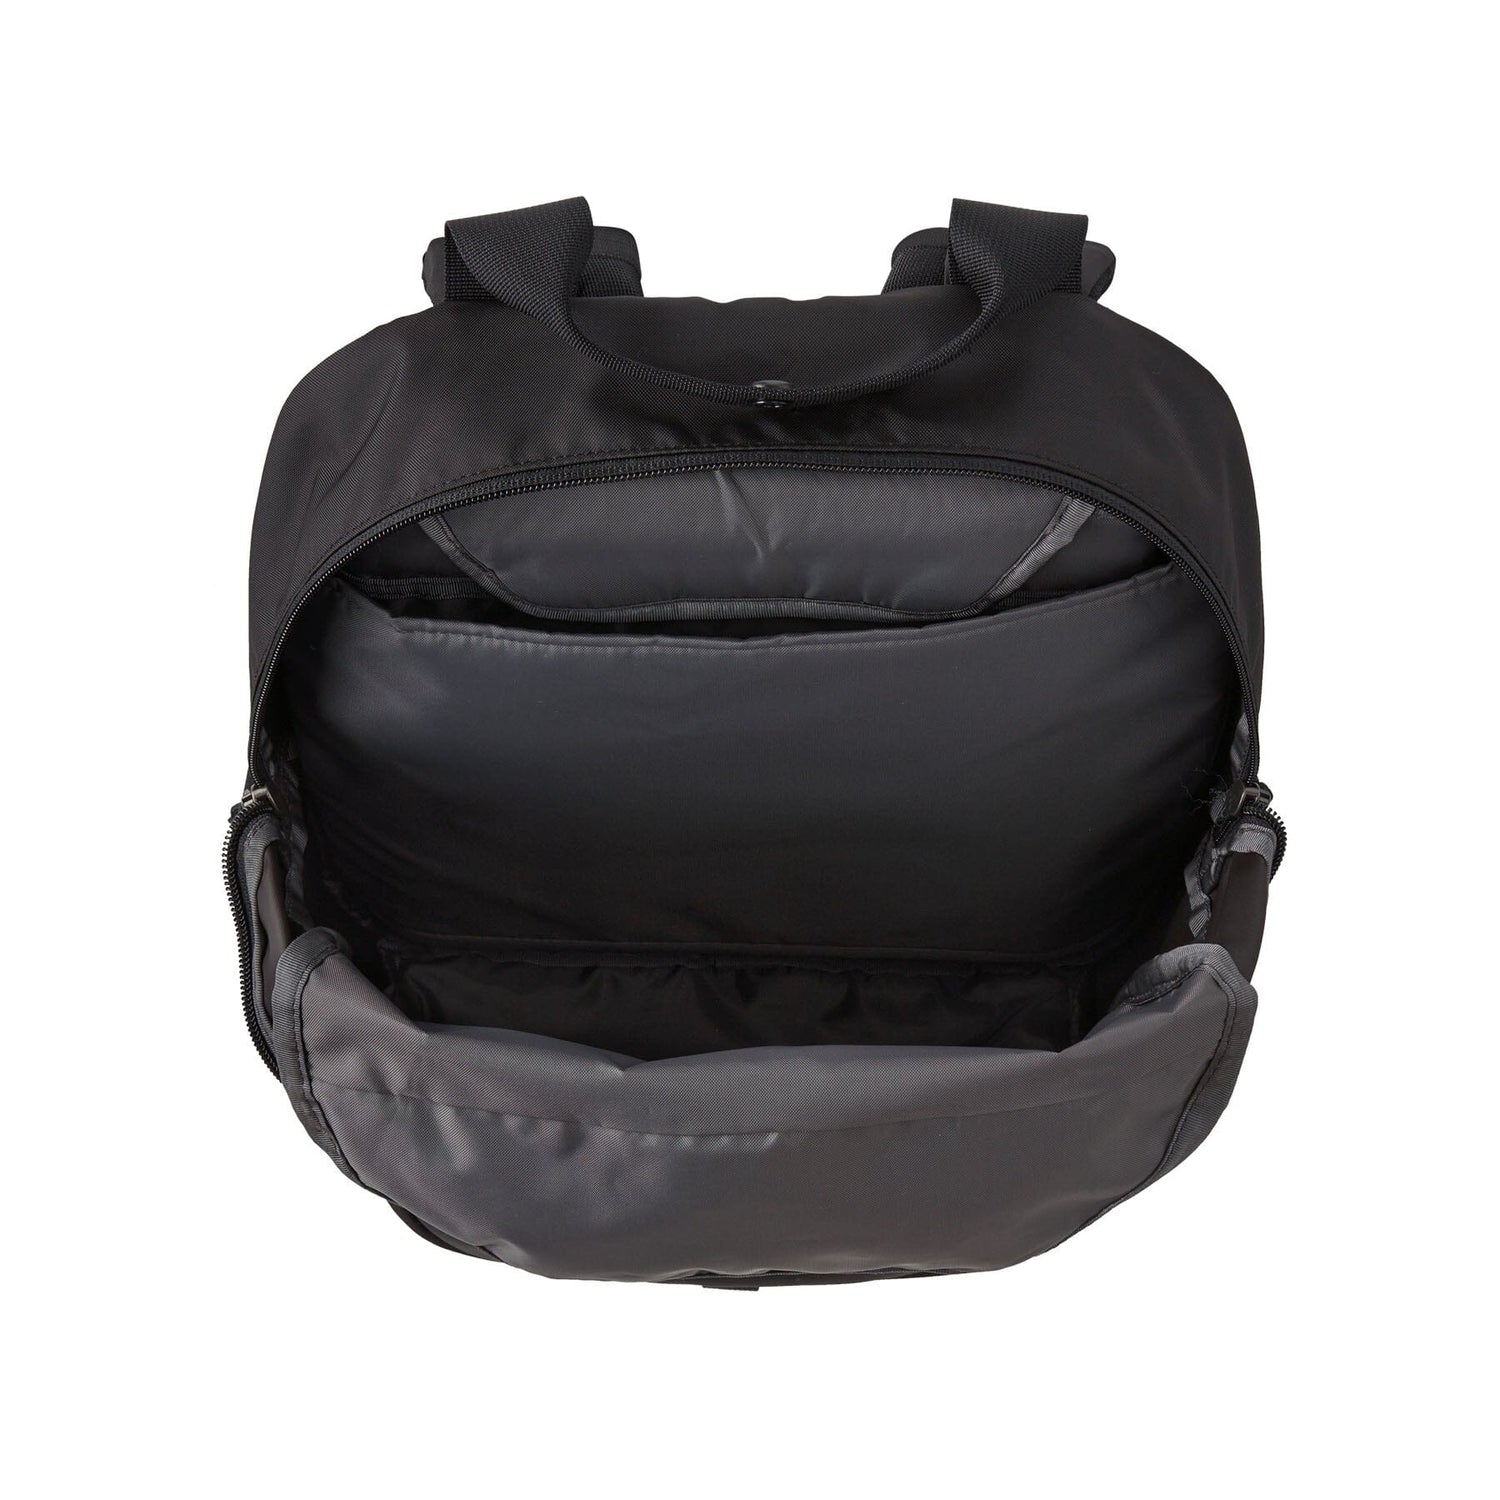 Patagonia - Atom Tote Pack 20L - Recycled Nylon & Polyester - Weekendbee - sustainable sportswear